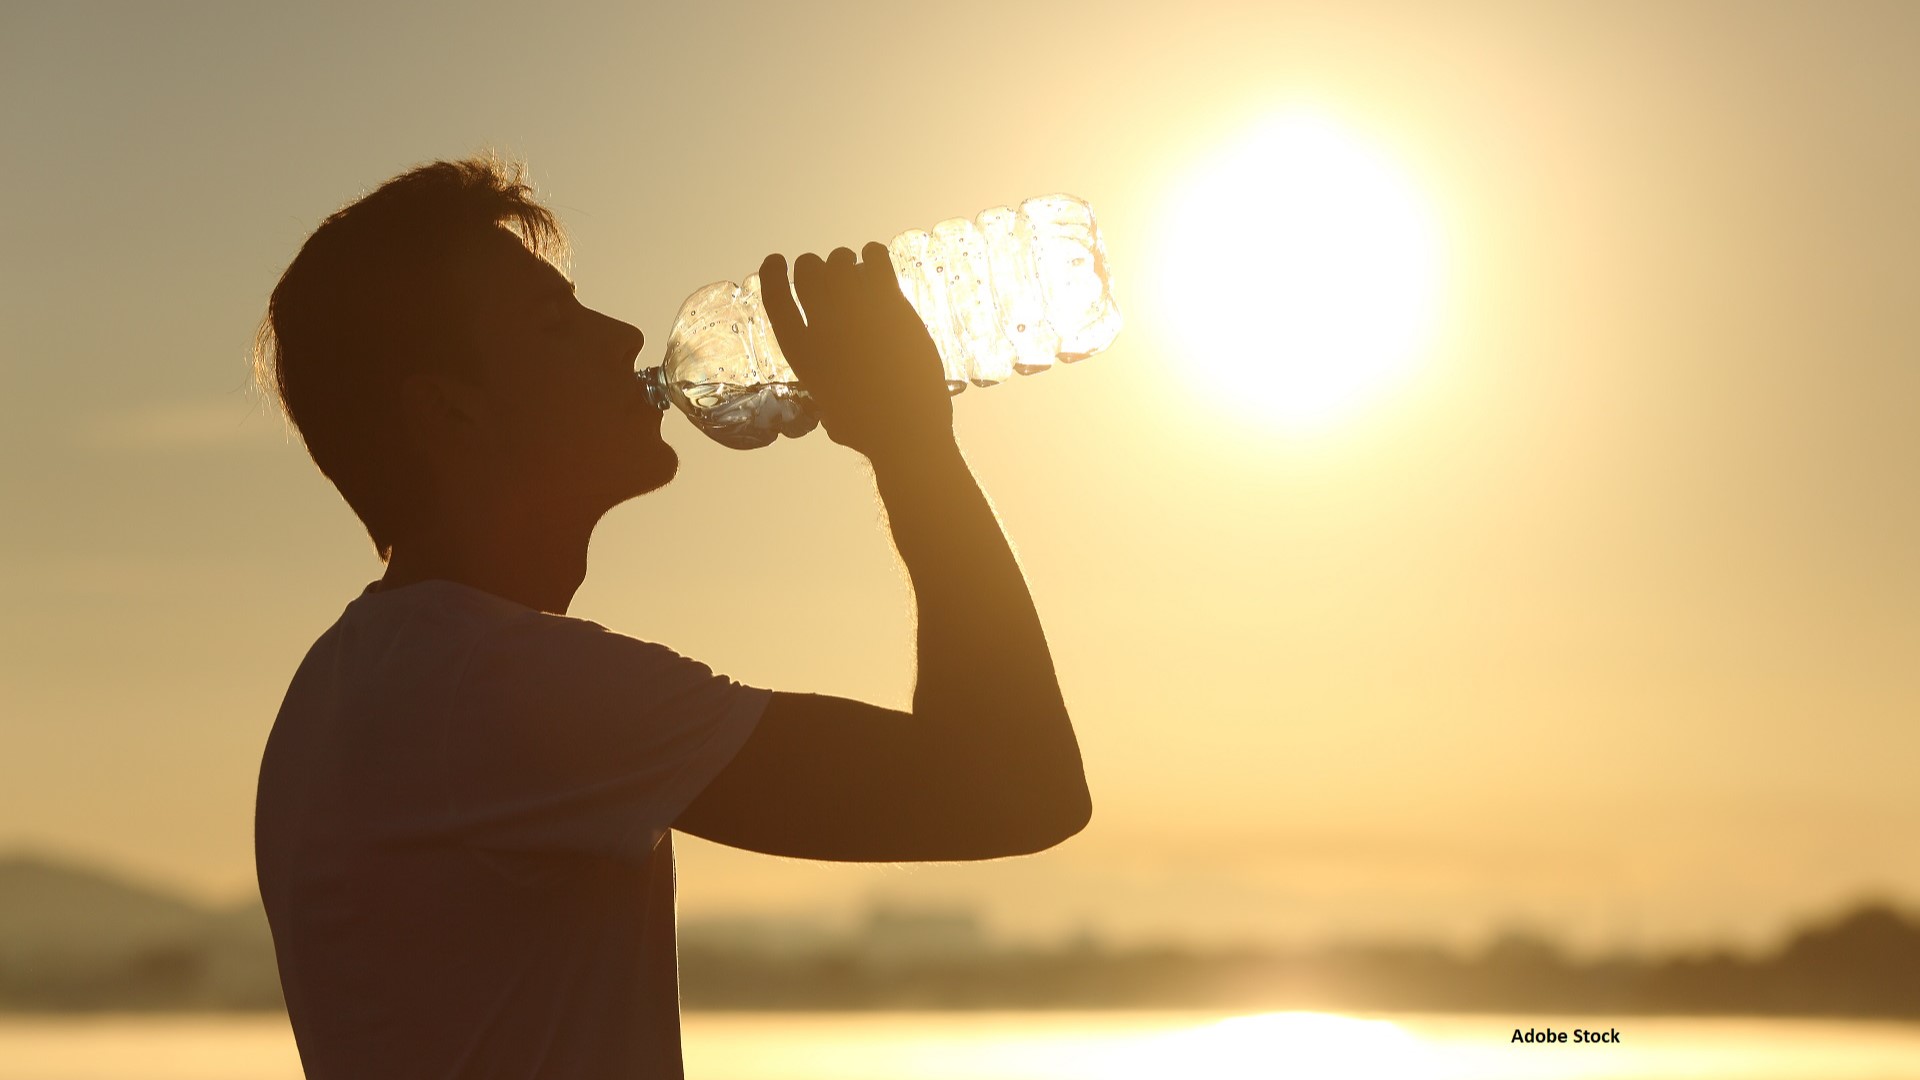 The human body shifts blood from organs to under the skin, which can have significant impacts. Experts say stay hydrated.